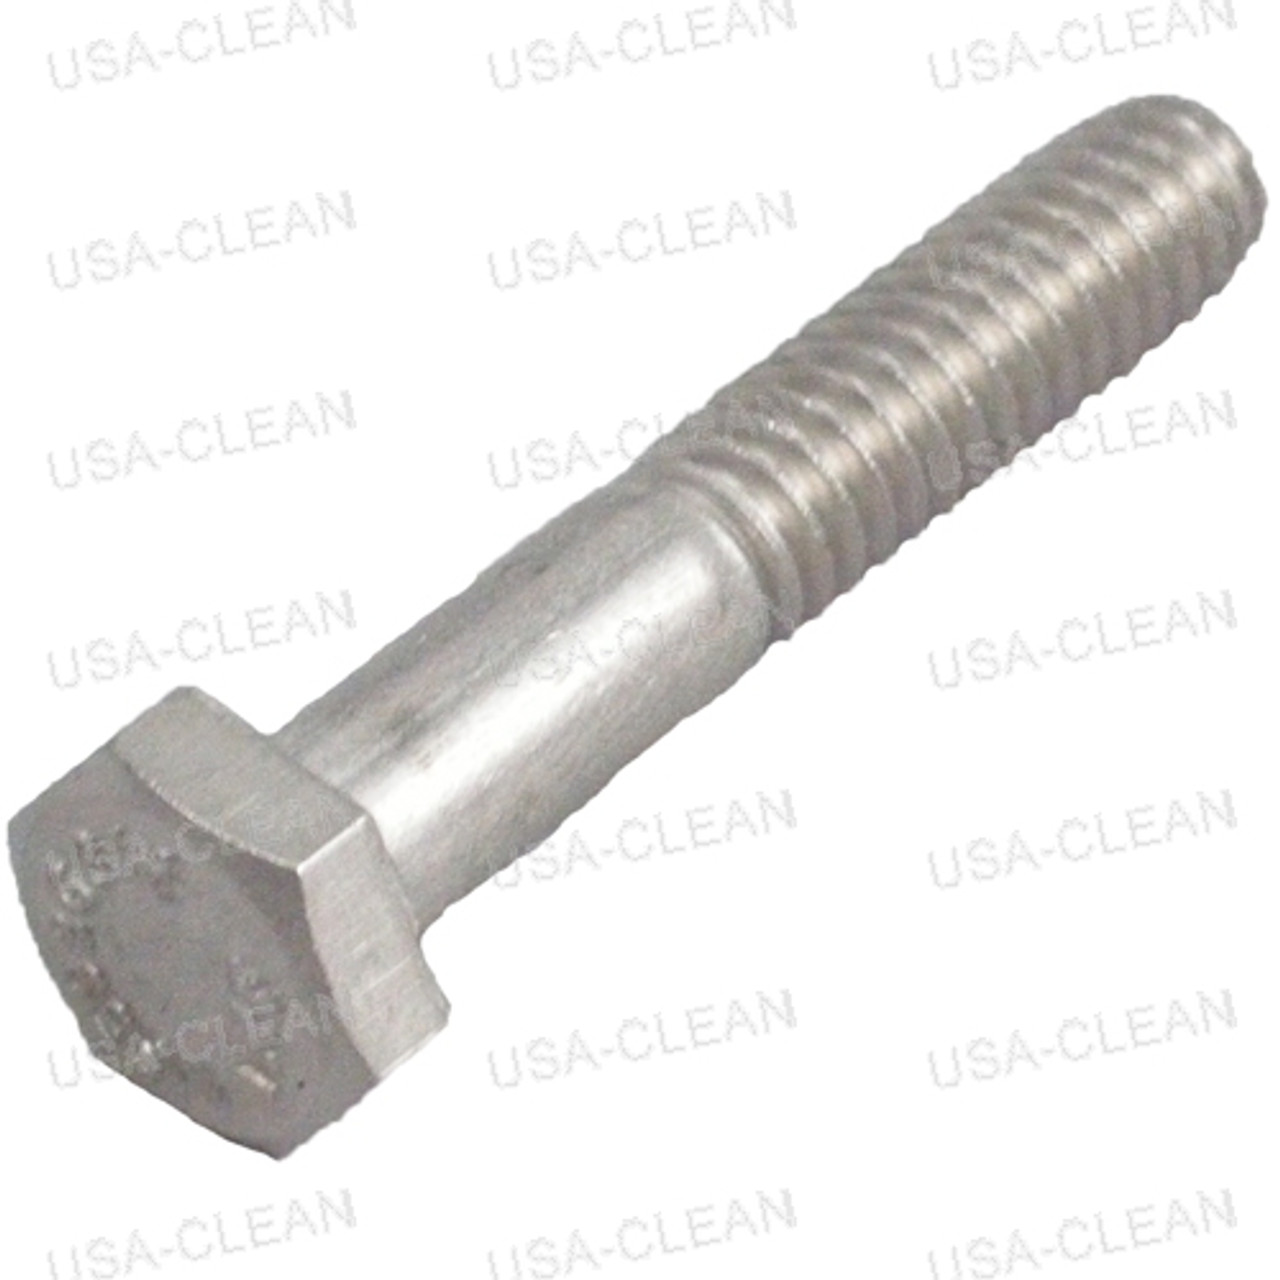 Bolt X 25mm Hex Head Full Thread Stainless Steel 999-0501, 48% OFF